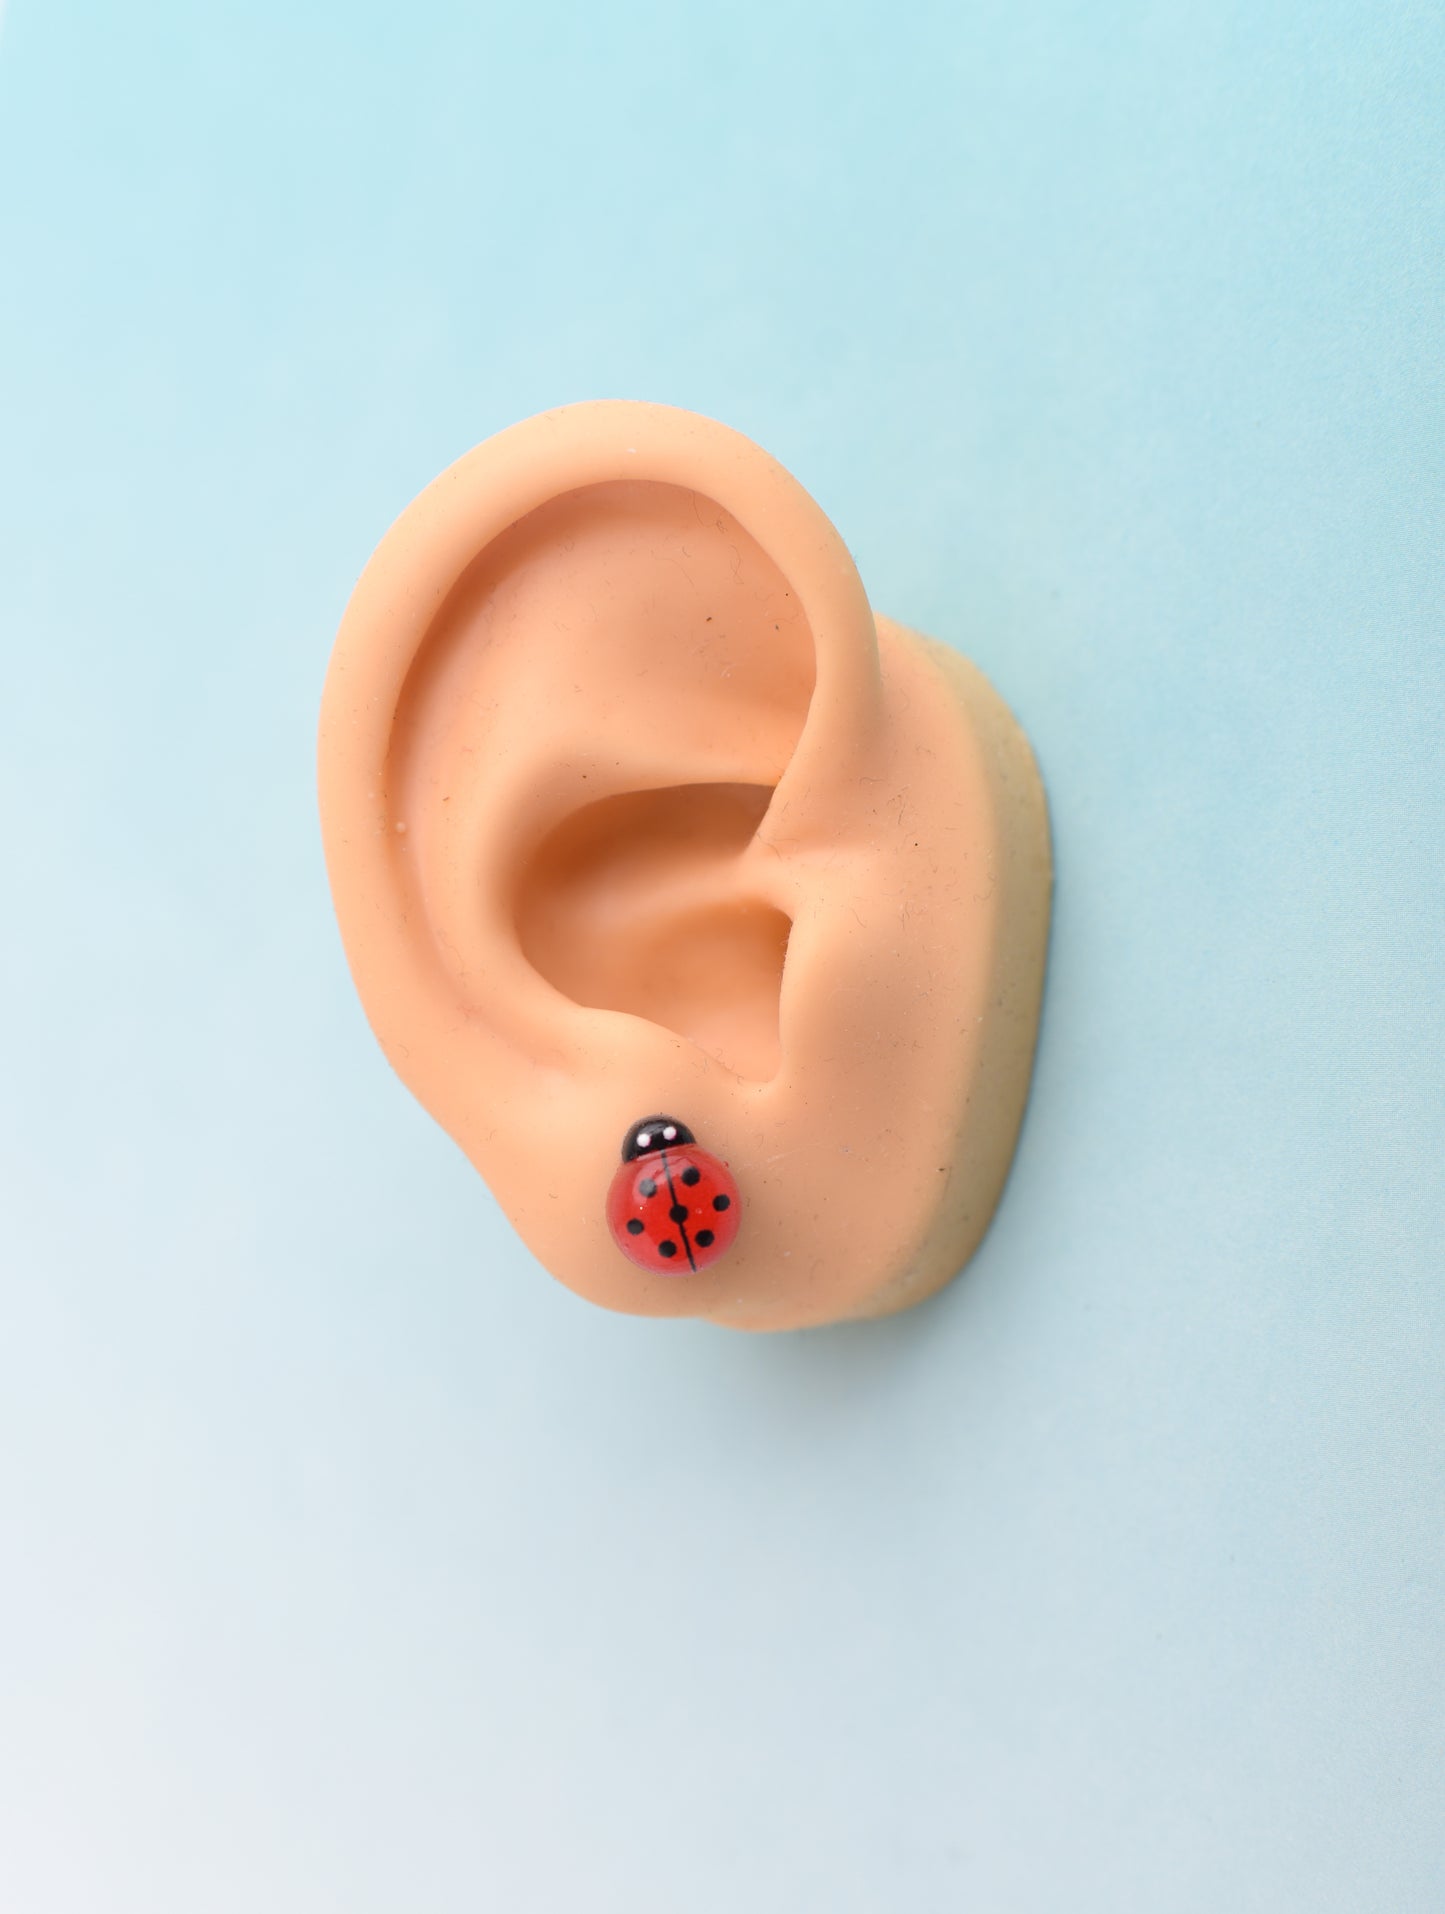 Mini Spring Bee, Rose, and Ladybug Earring Trio with Titanium Posts